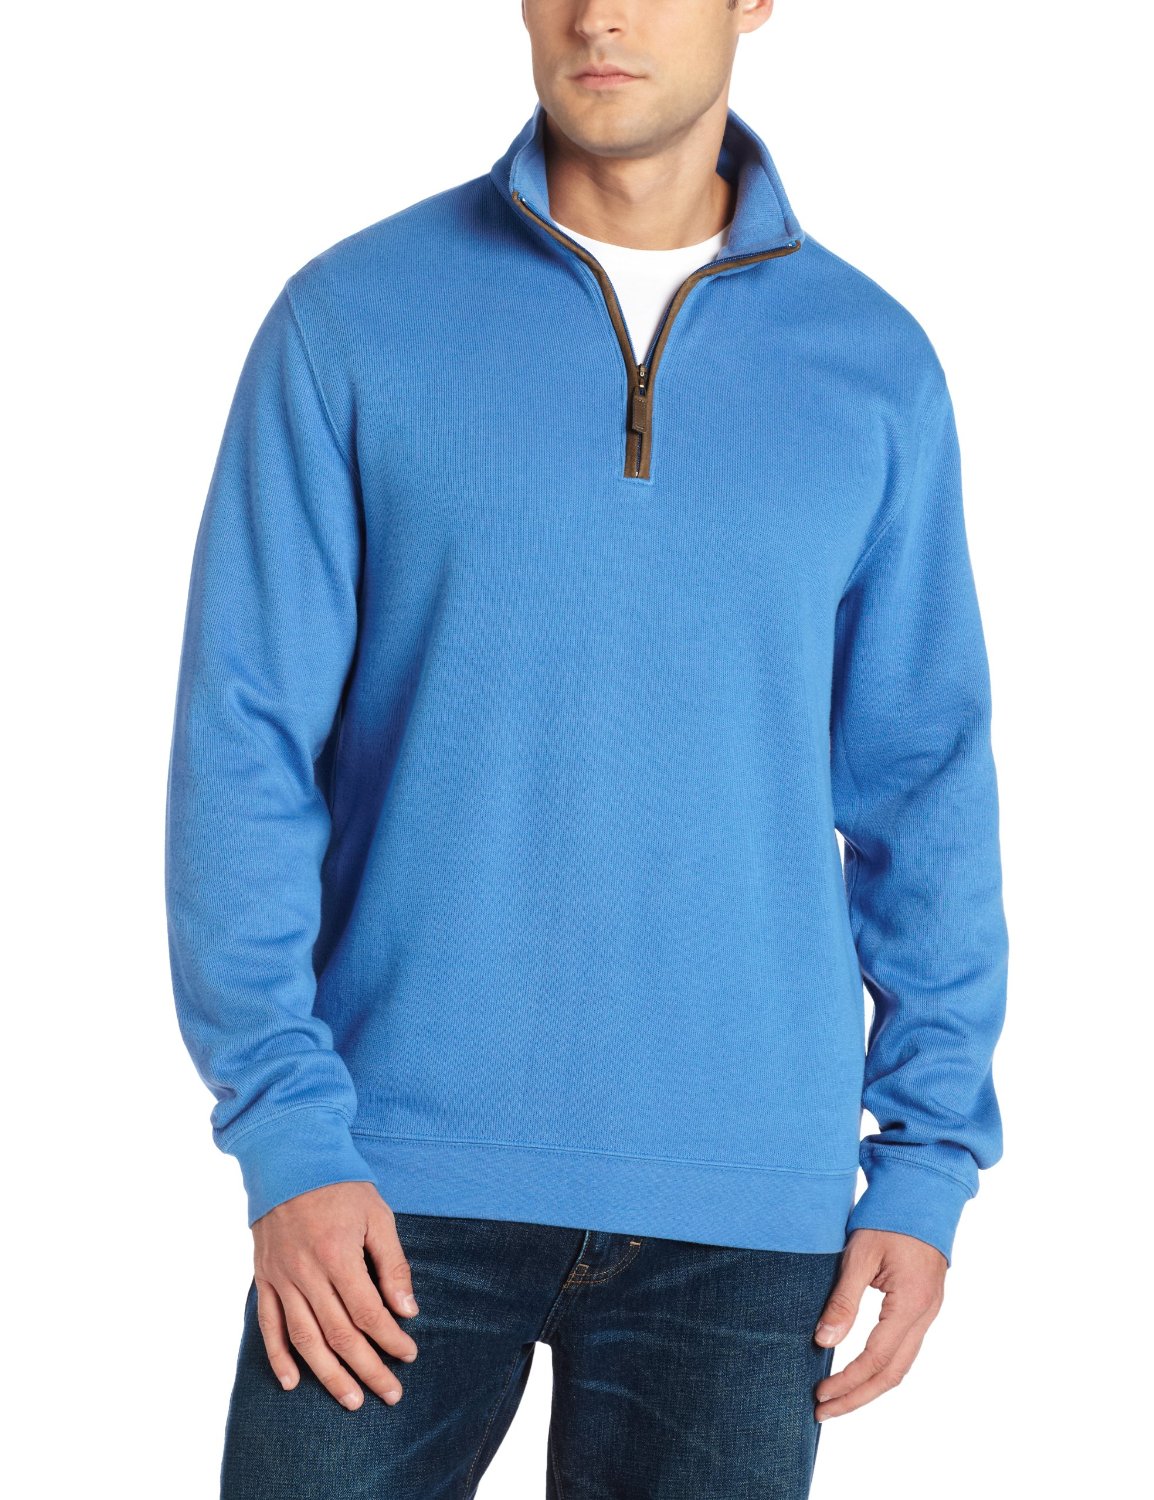 Mens Collection Contemporary Mock Pullovers